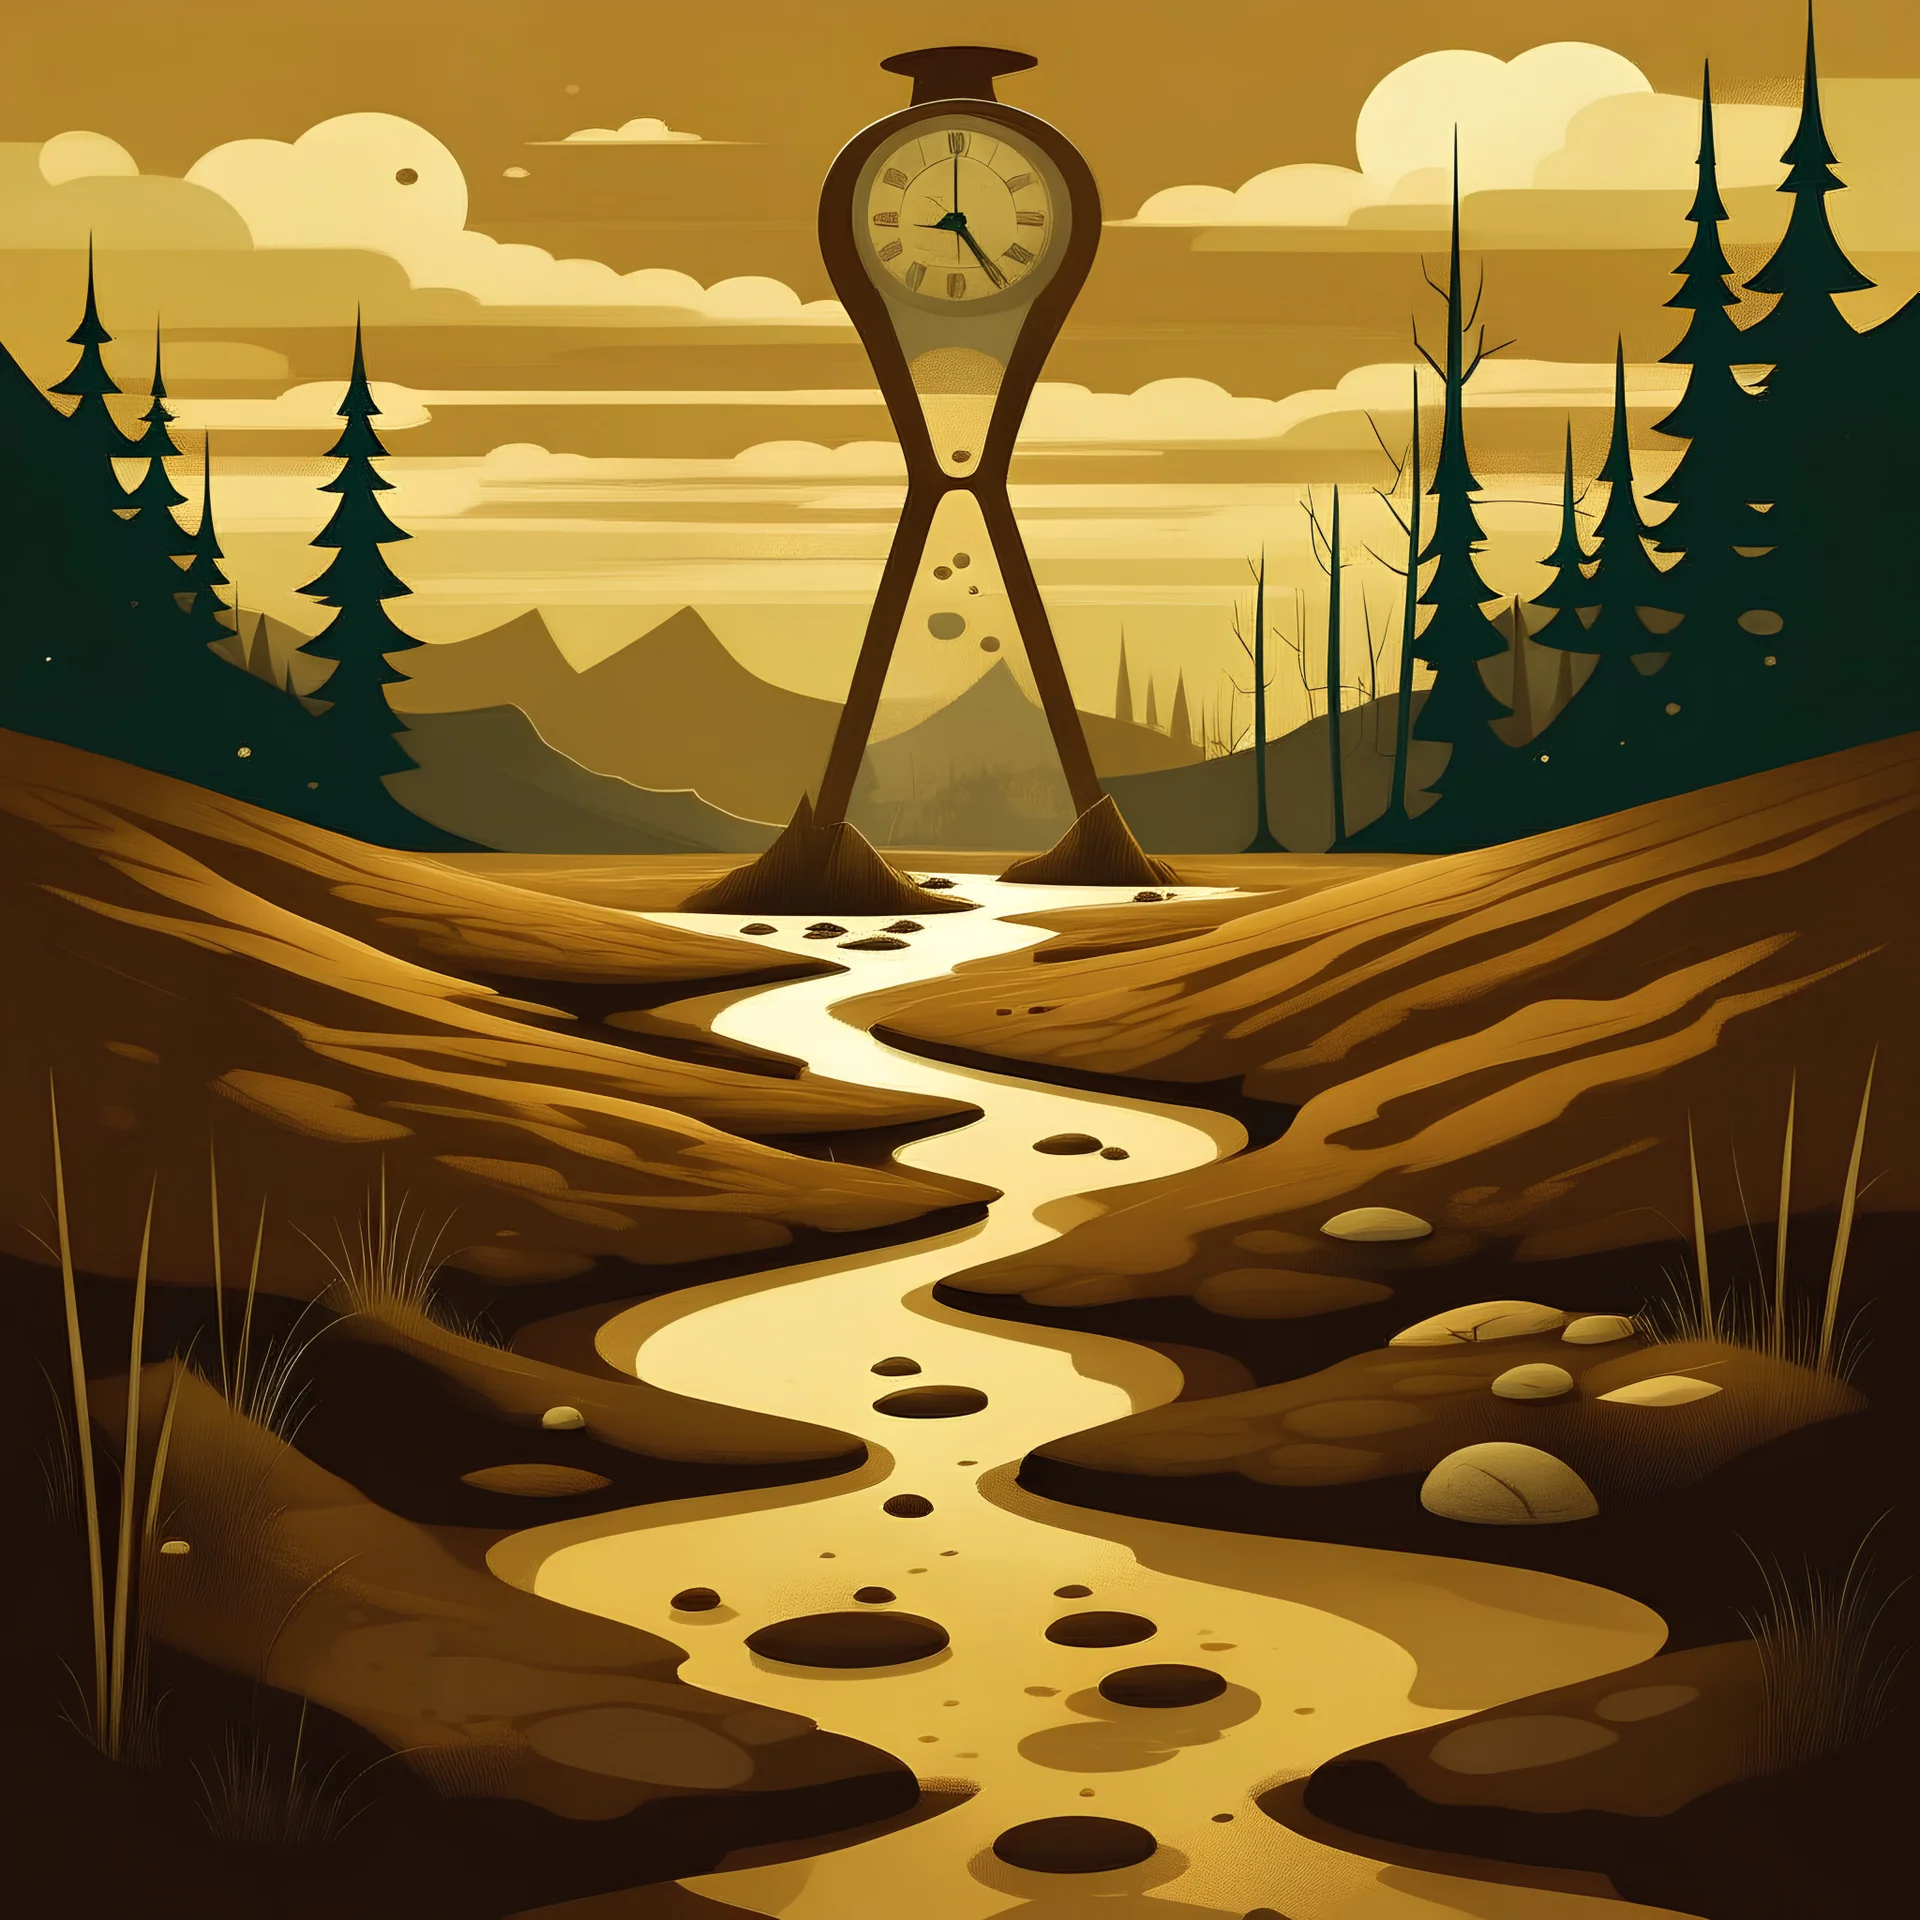 This visual representation features a stylized depiction of a peat bog environment, symbolizing the natural landscape. Within the peat bog, an hourglass is prominently displayed, representing the passage of time and the concept of geological epochs. At the center of the hourglass, the radioactive symbol for Americium-241 (241Am) is depicted, highlighting its presence within the peat bog layers. This symbolizes the incorporation of Americium-241 into peat bogs as a result of nuclear activities,